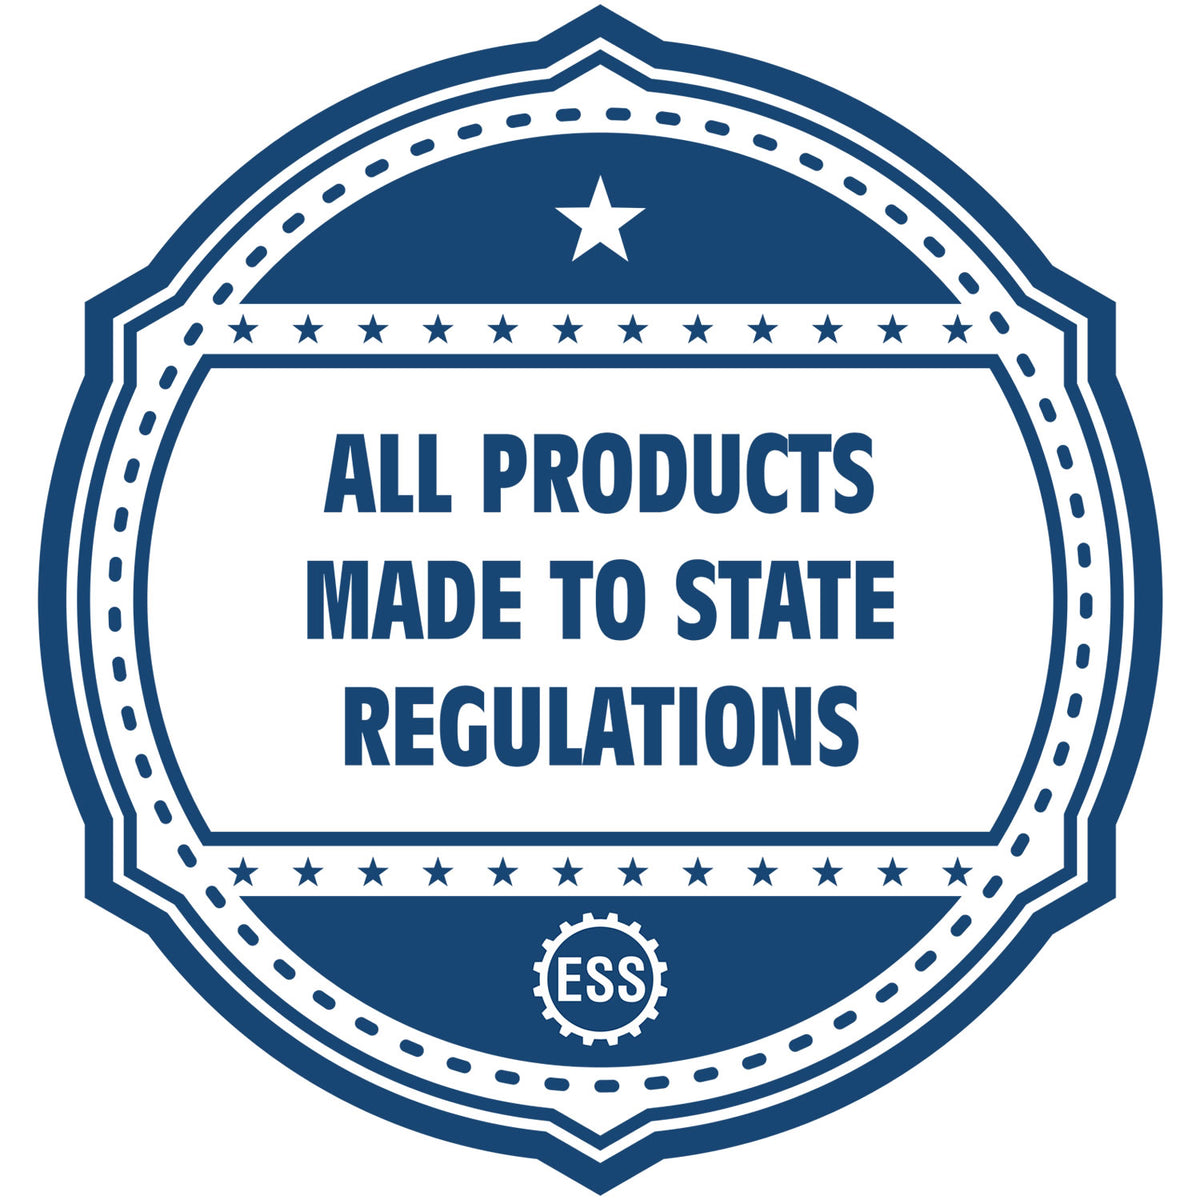 A blue icon or badge for the State of Kentucky Extended Long Reach Geologist Seal showing that this product is made in compliance with state regulations.